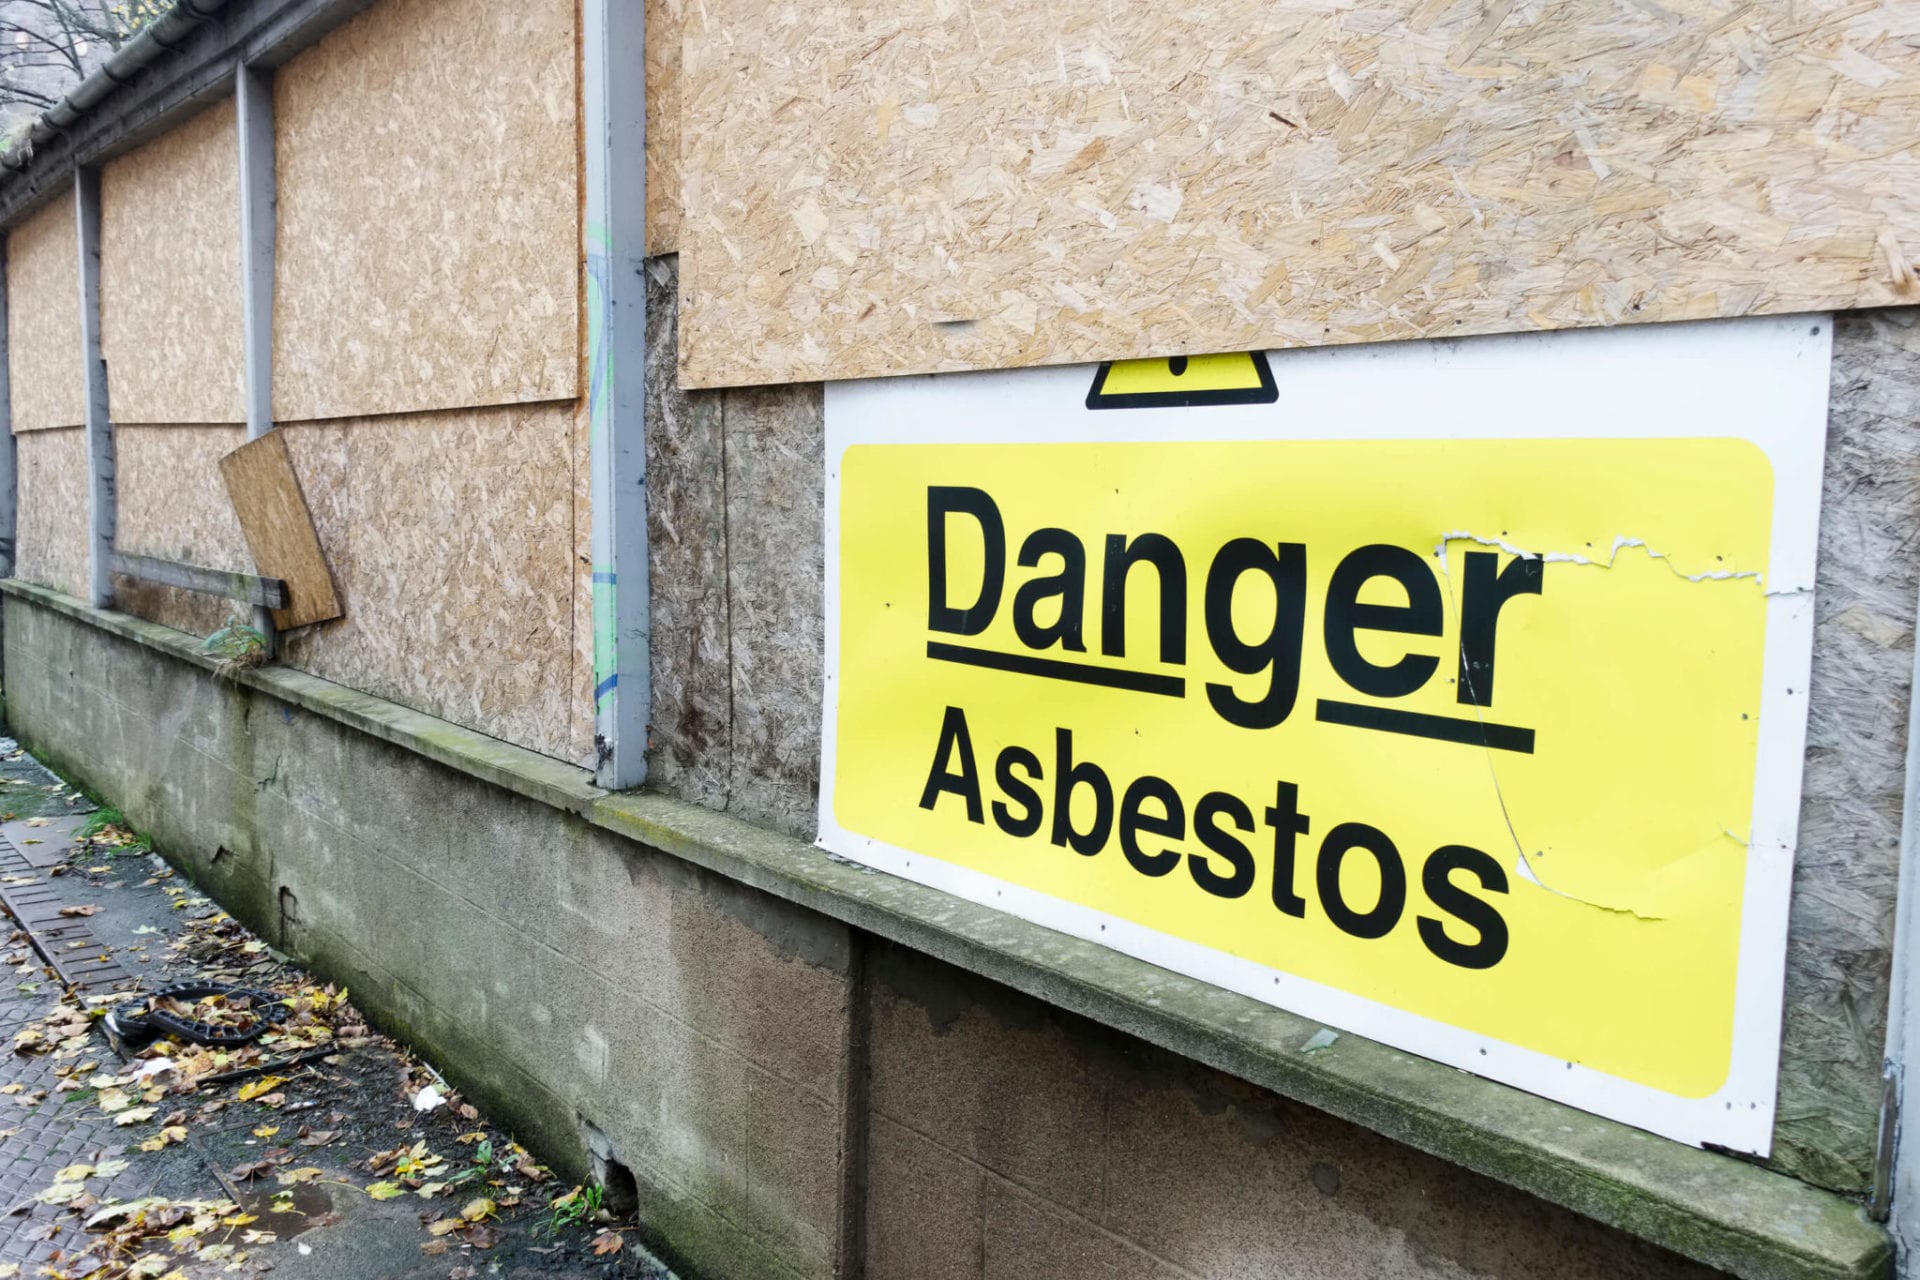 Asbestos danger sign at building construction site